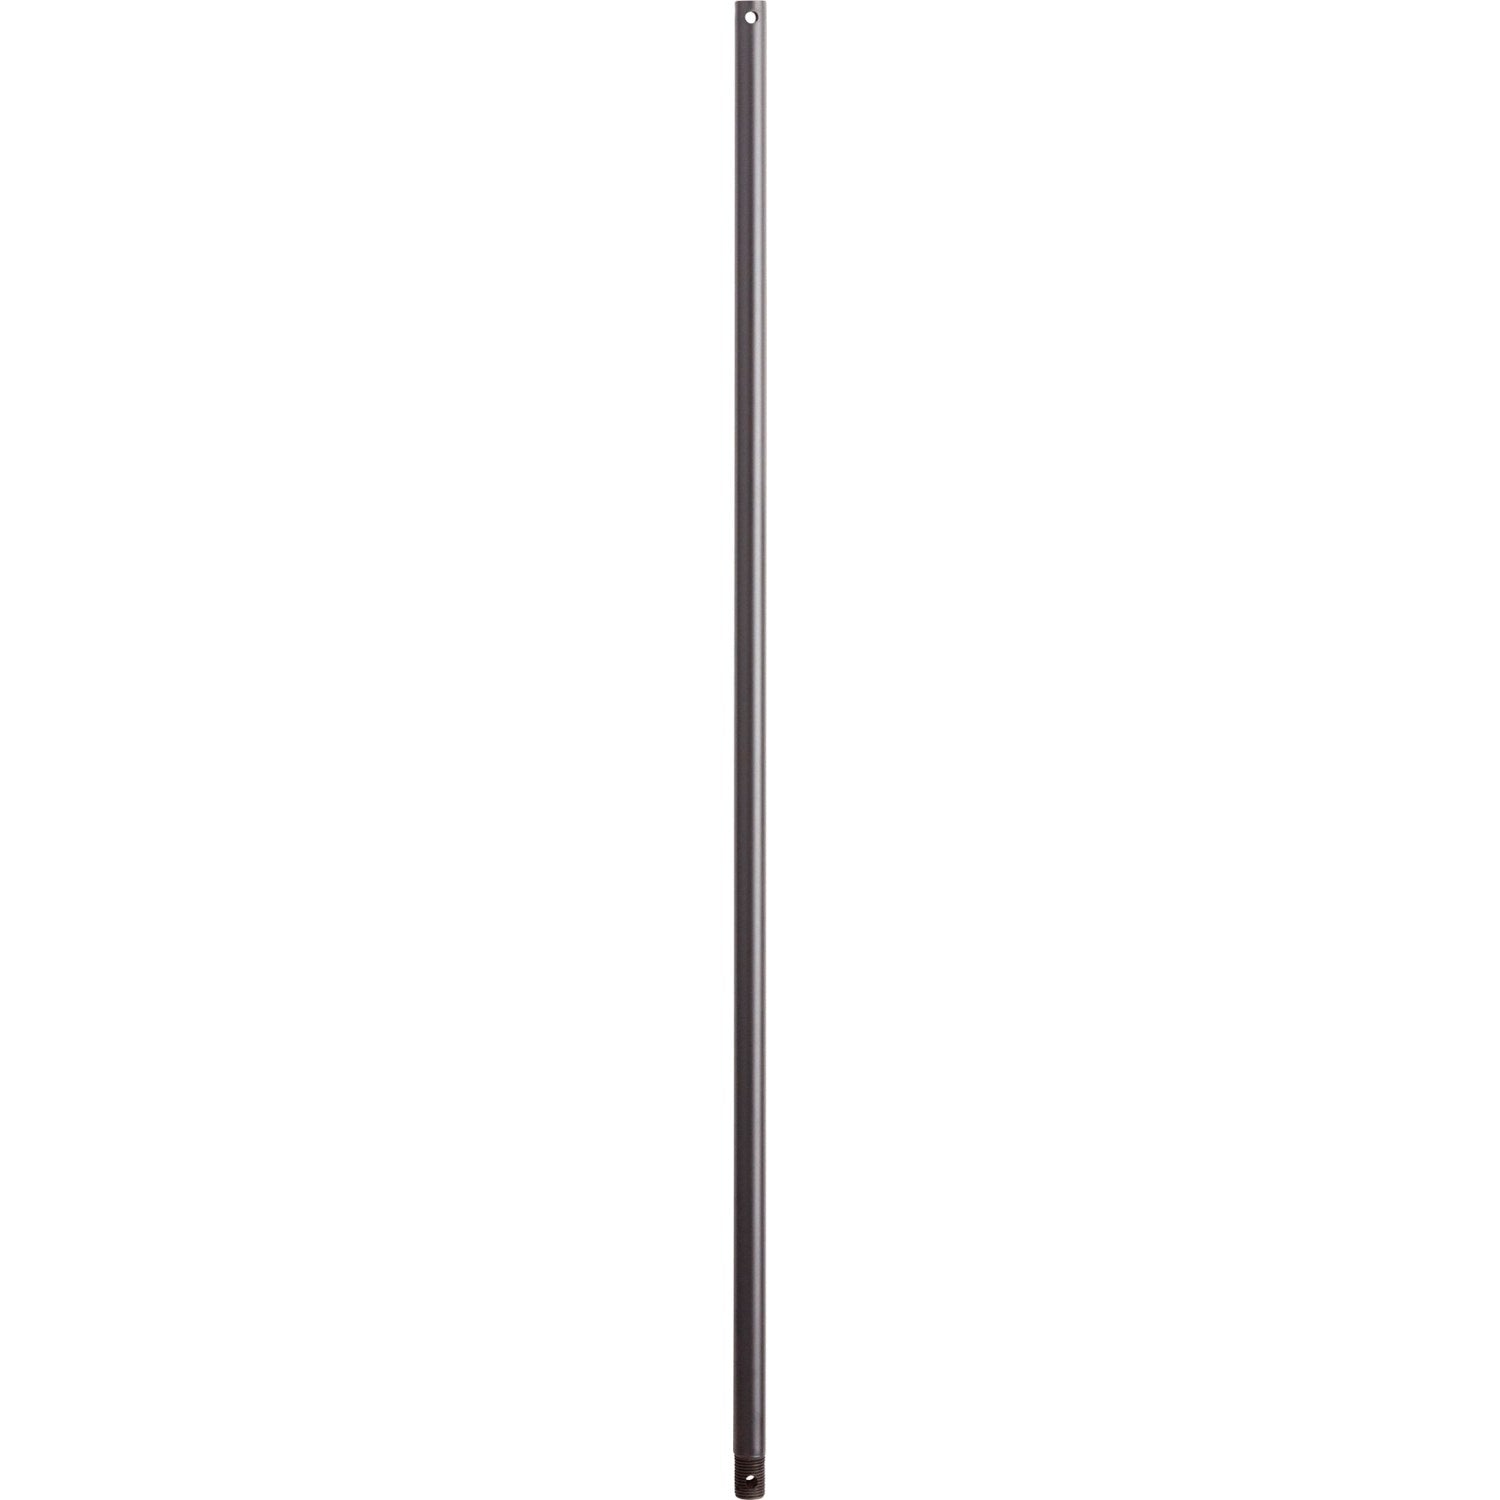 Quorum - 6-3695 - Downrod - 36 in. Downrods - Old World